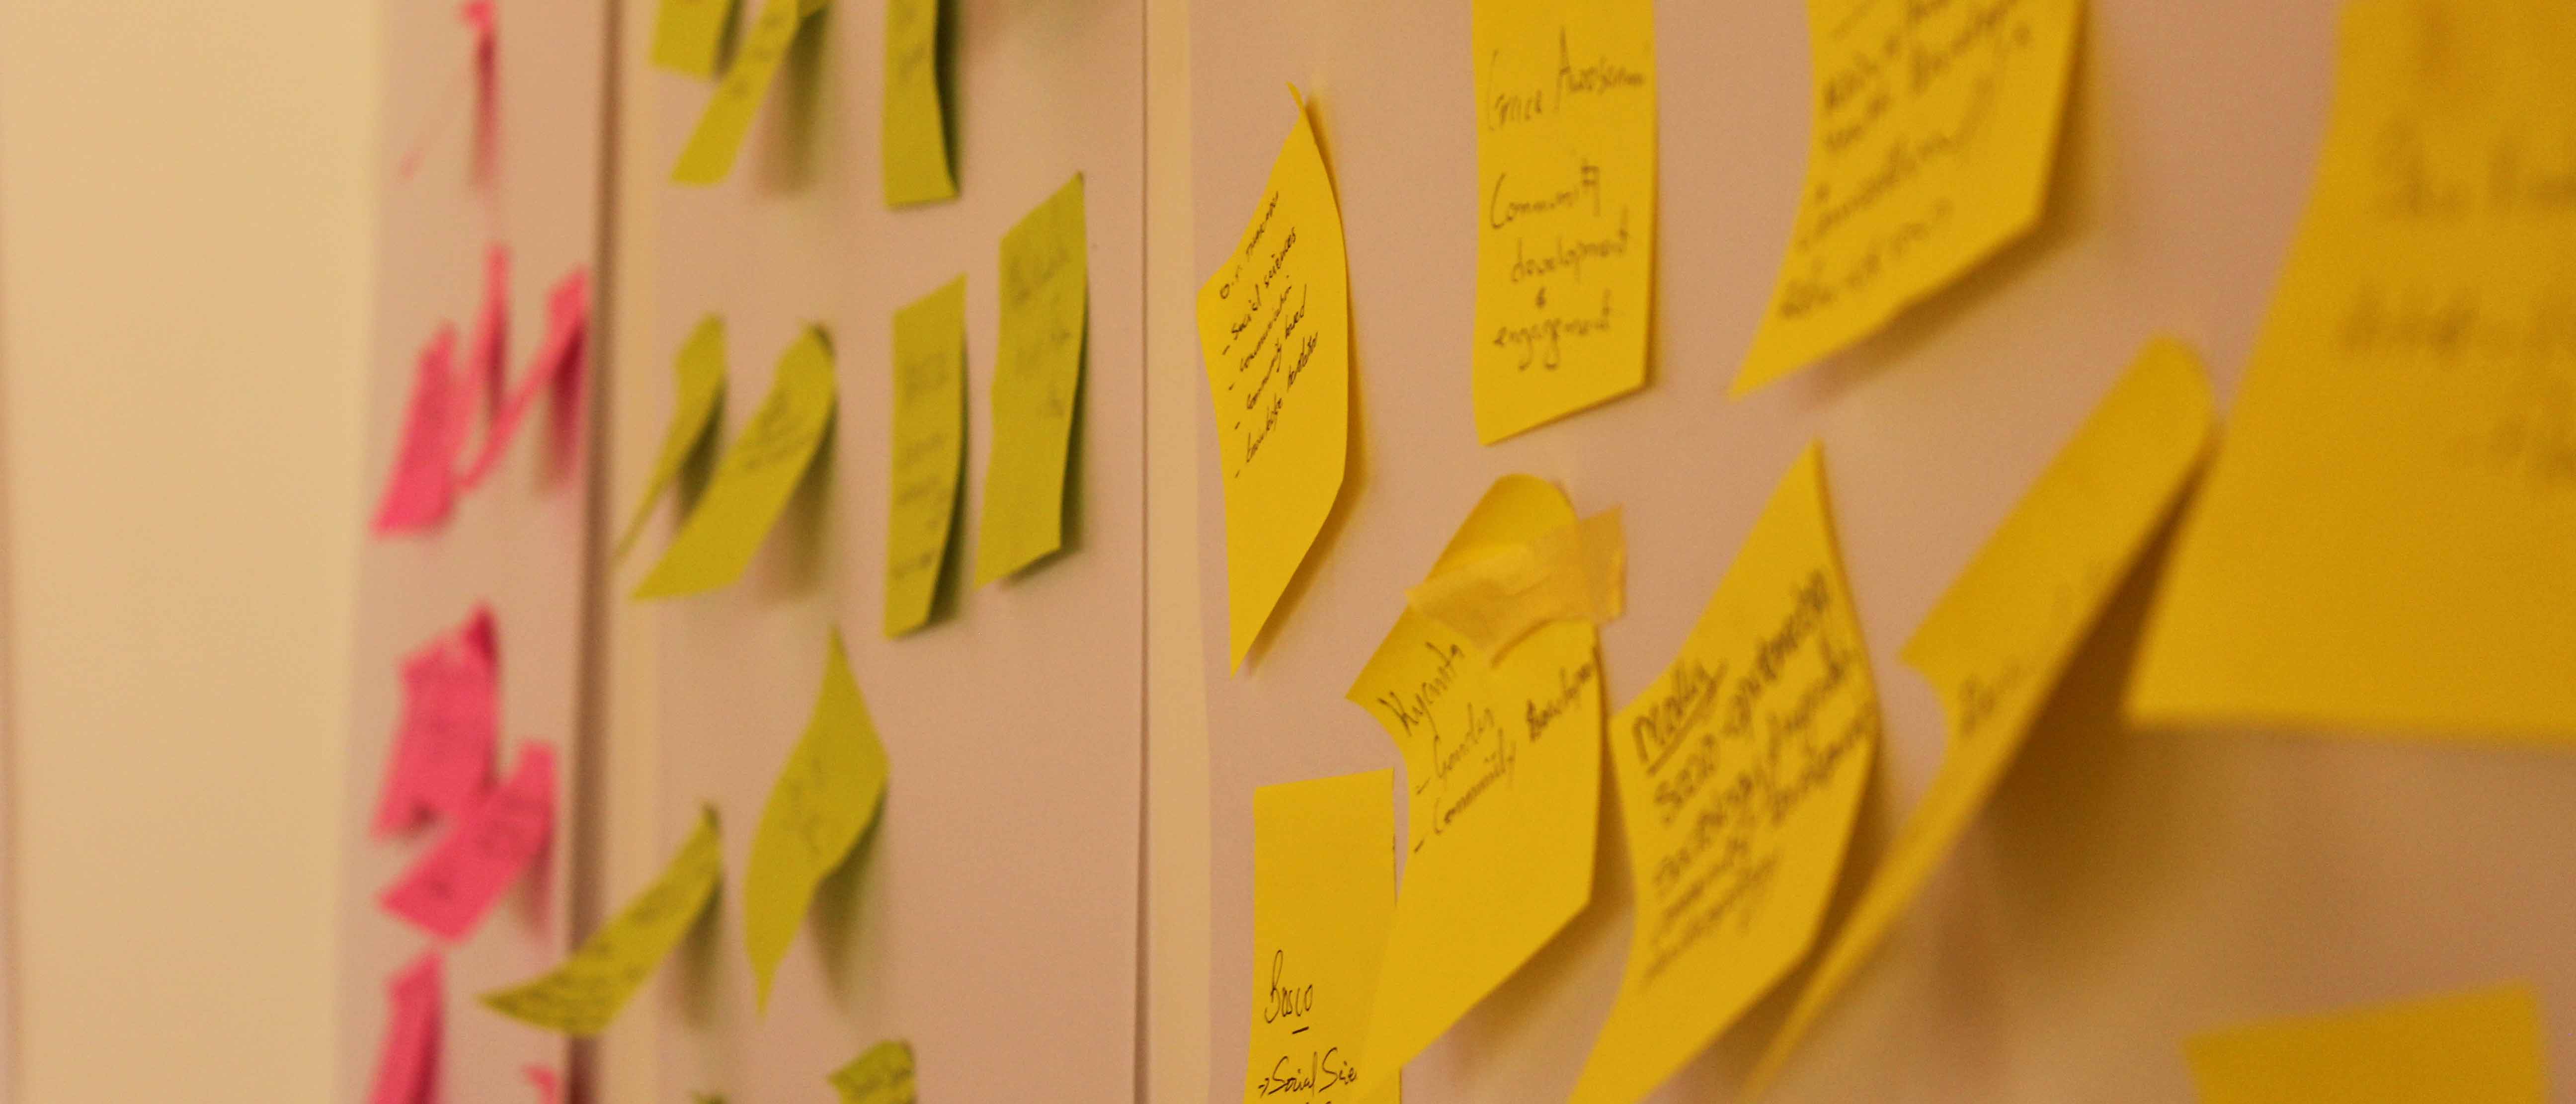 Post-It Notes in pink, green and yellow with writing on them stuck to a wall